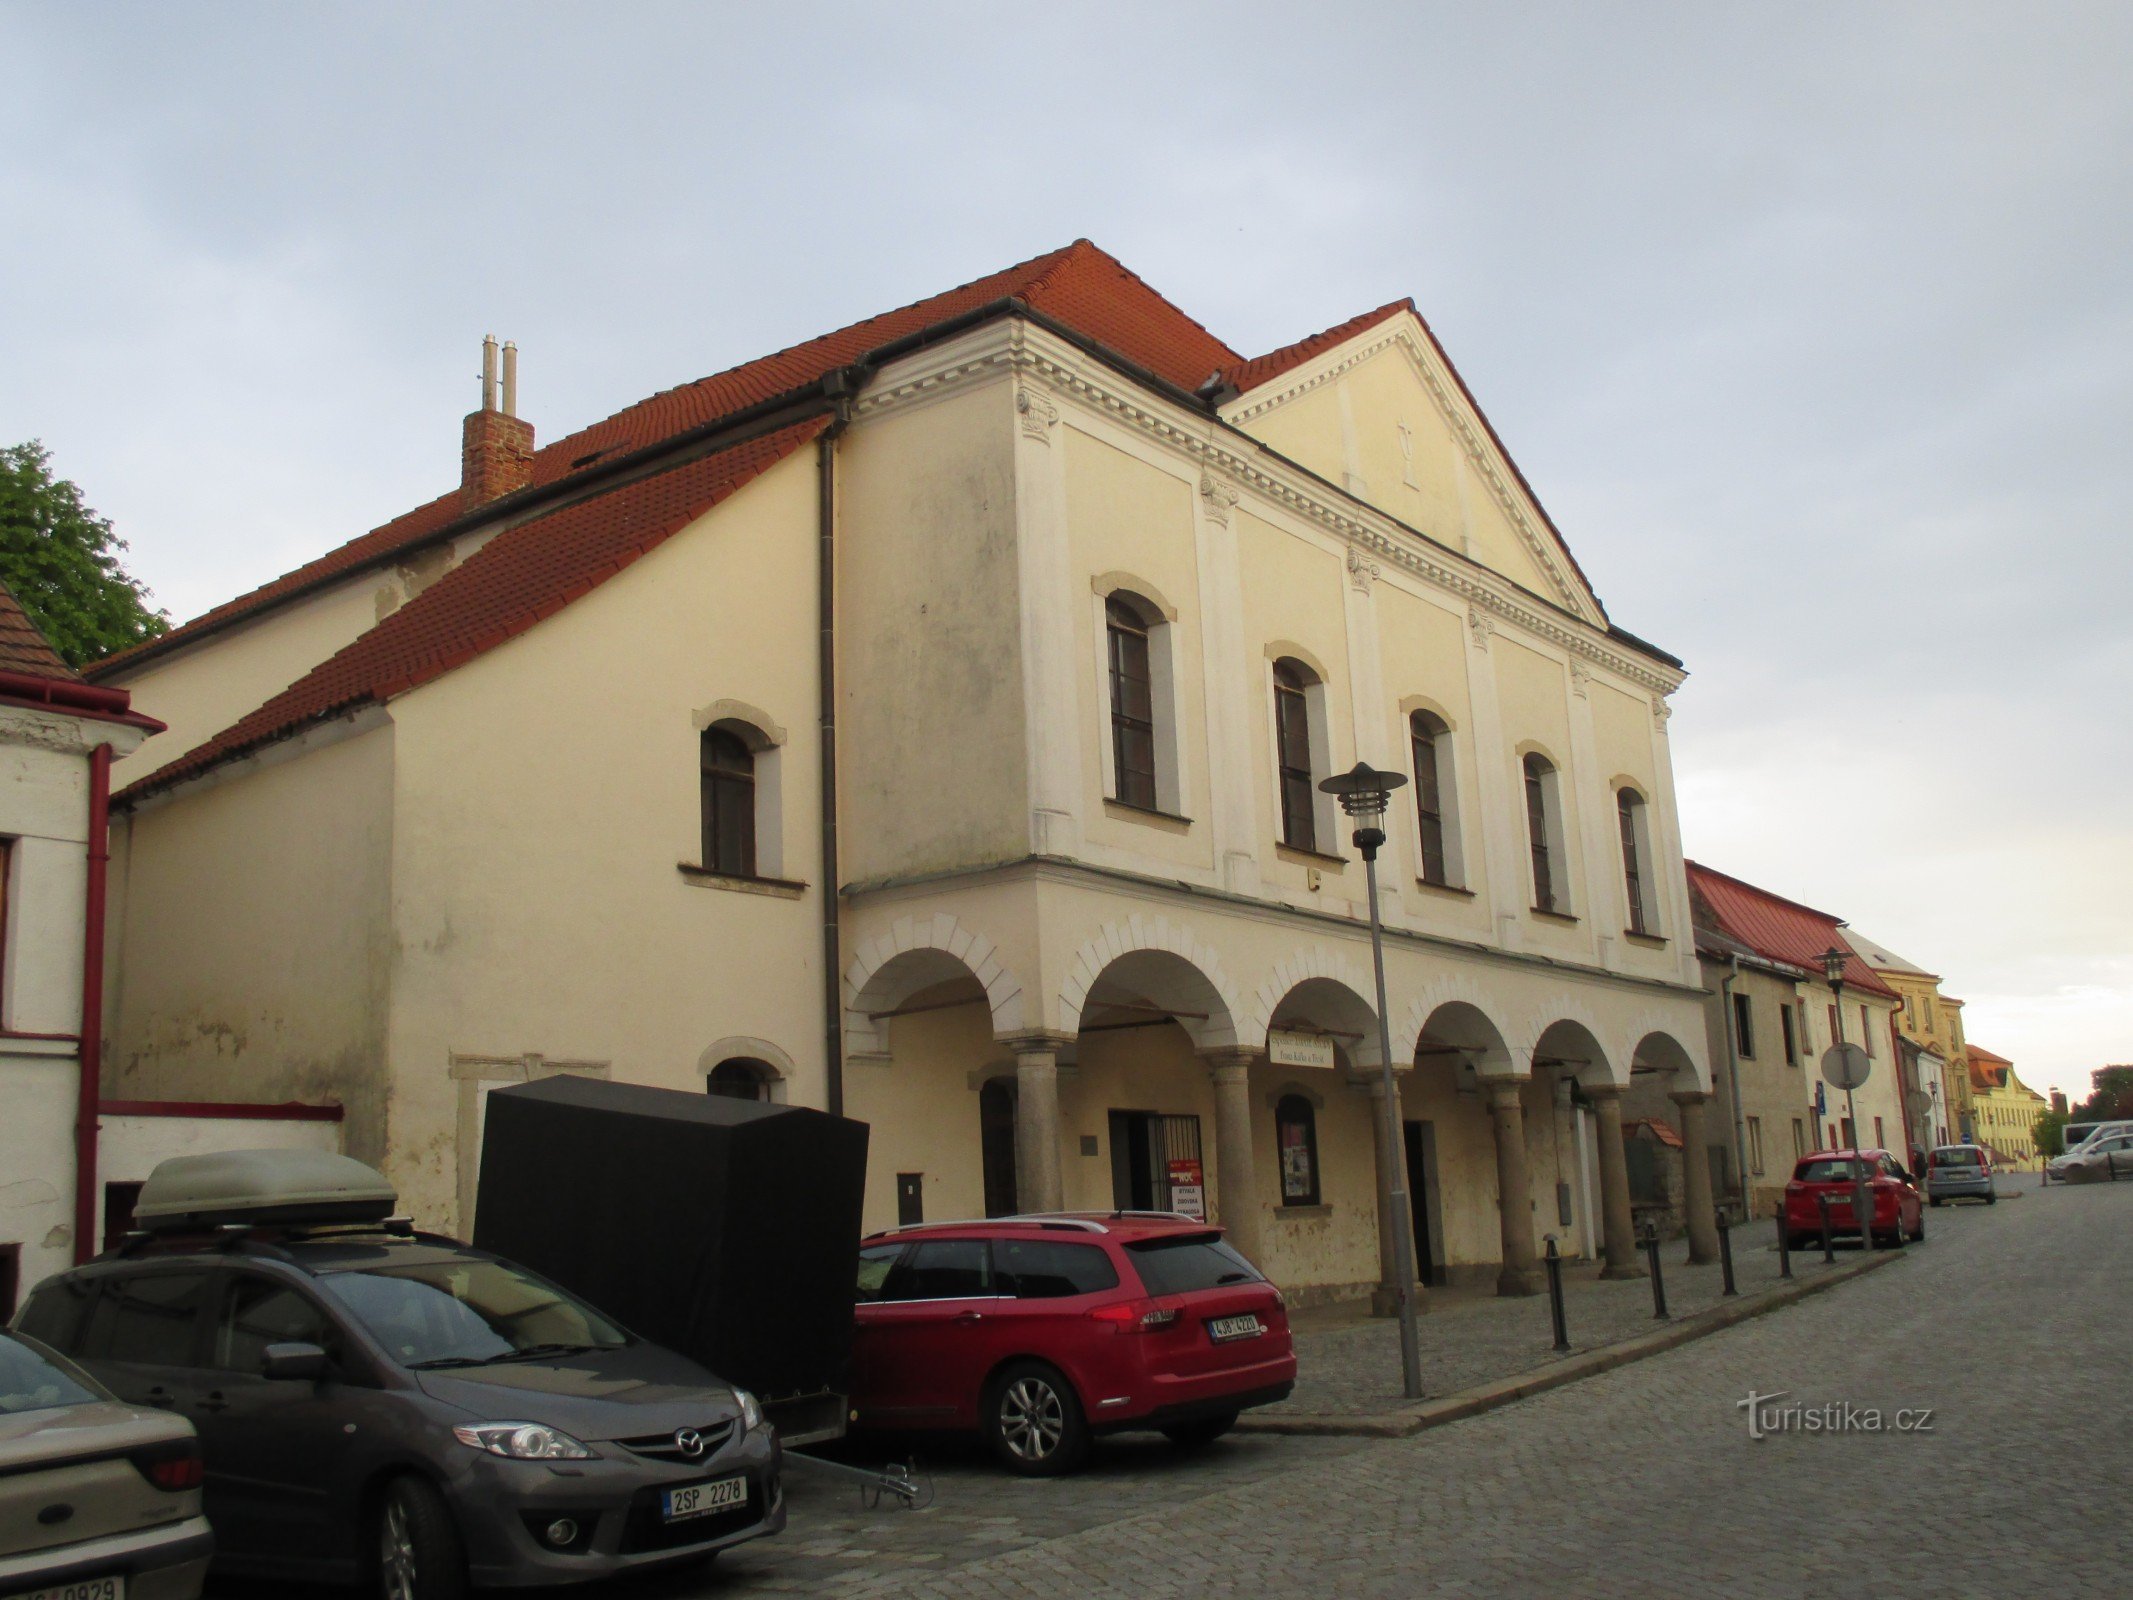 The former synagogue